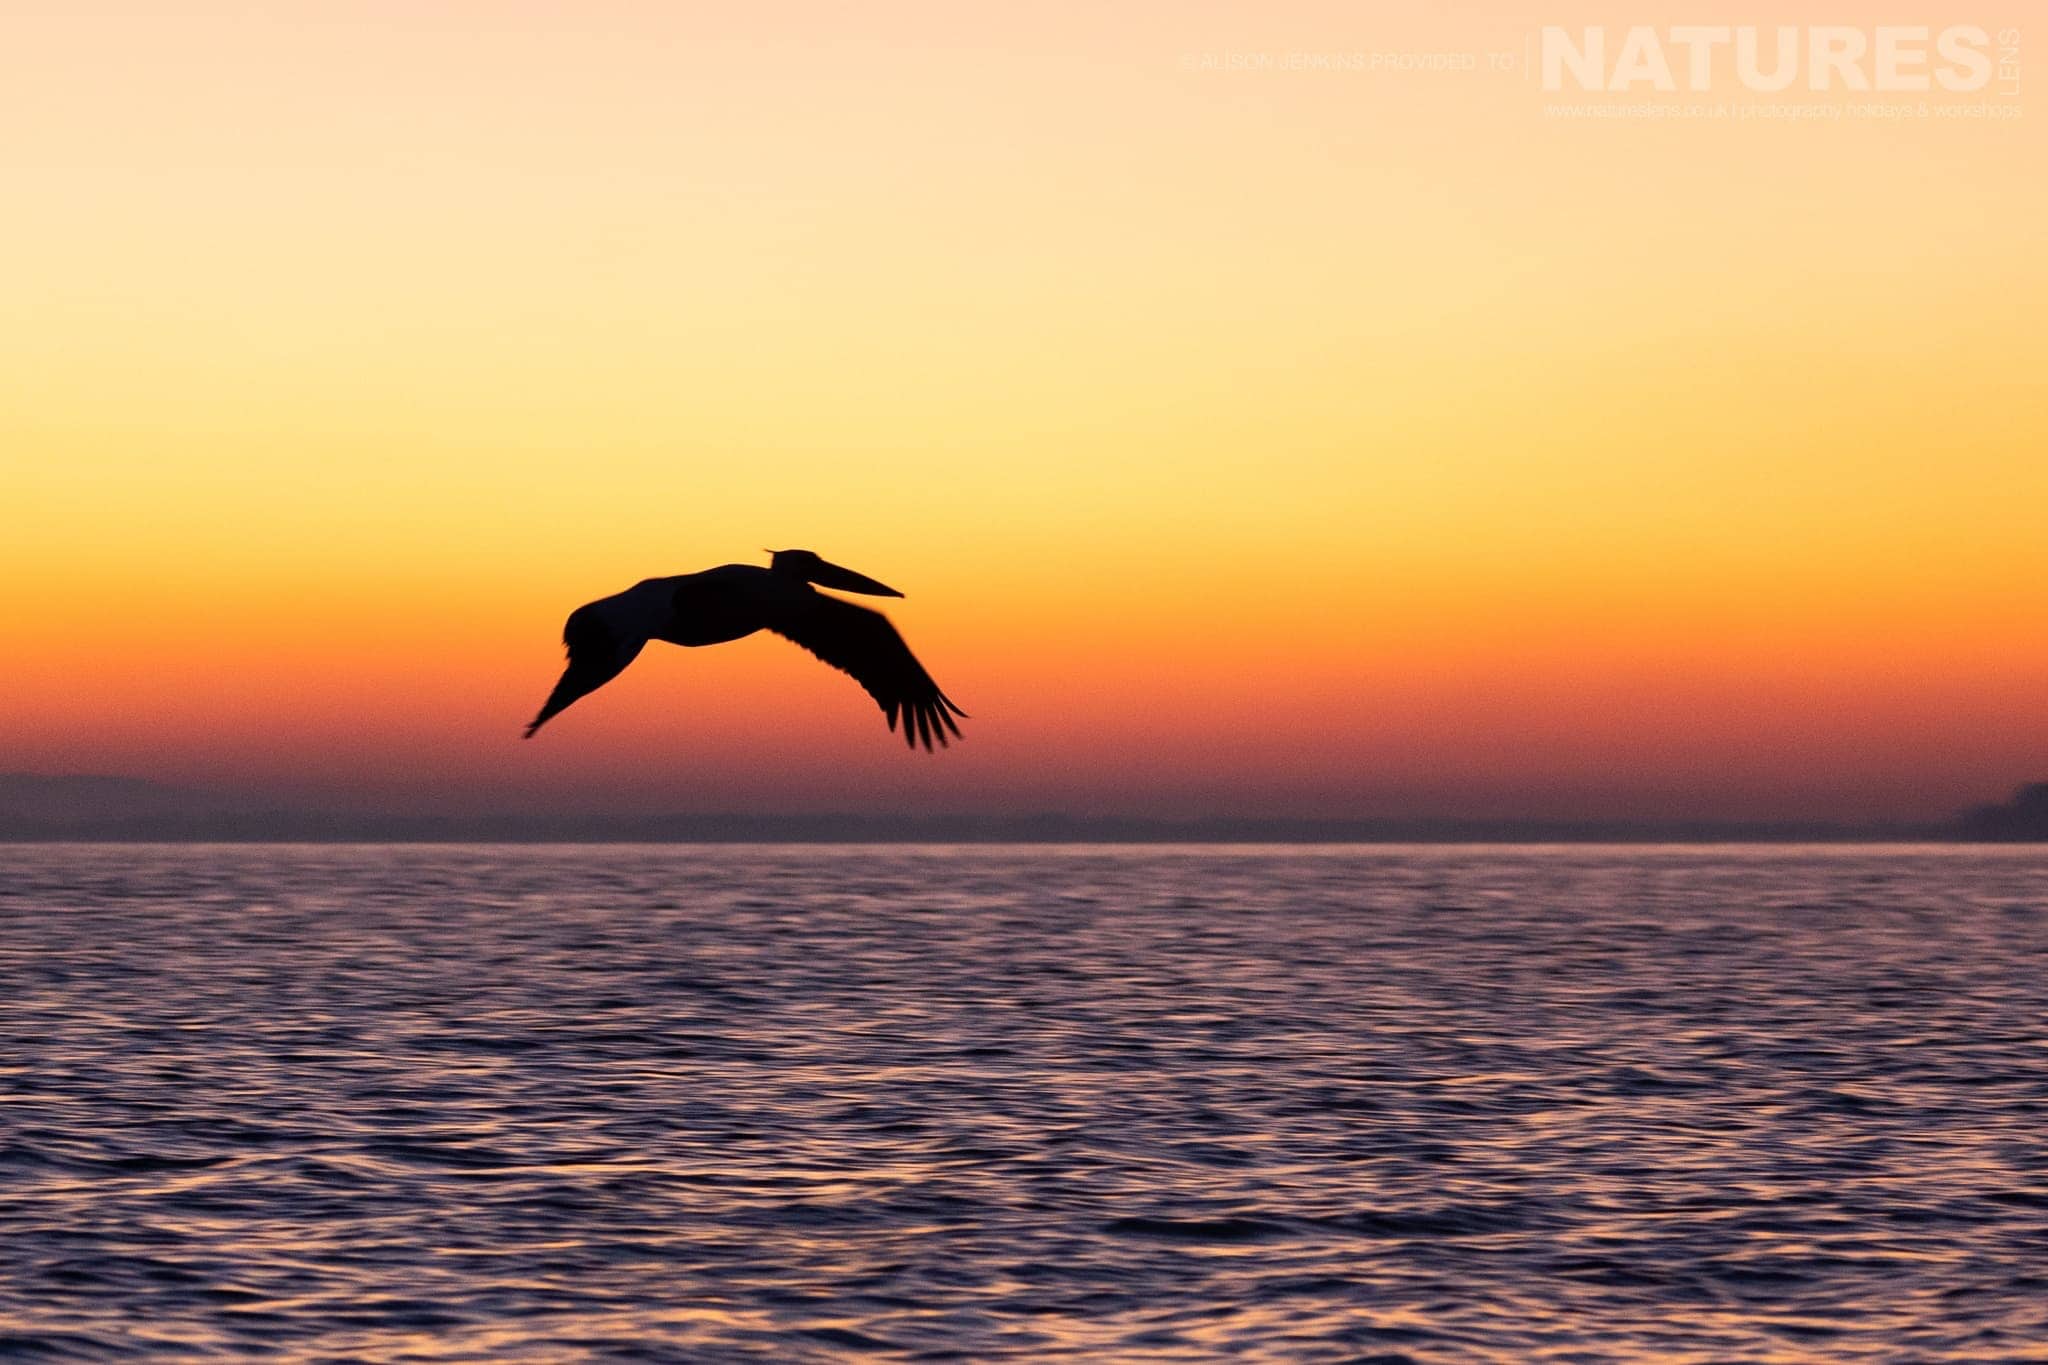 One Of The Magnificent Pelicans Of Lake Kerkini In Flight At Sunrise Photographed During A Natureslens Wildlife Photography Holiday